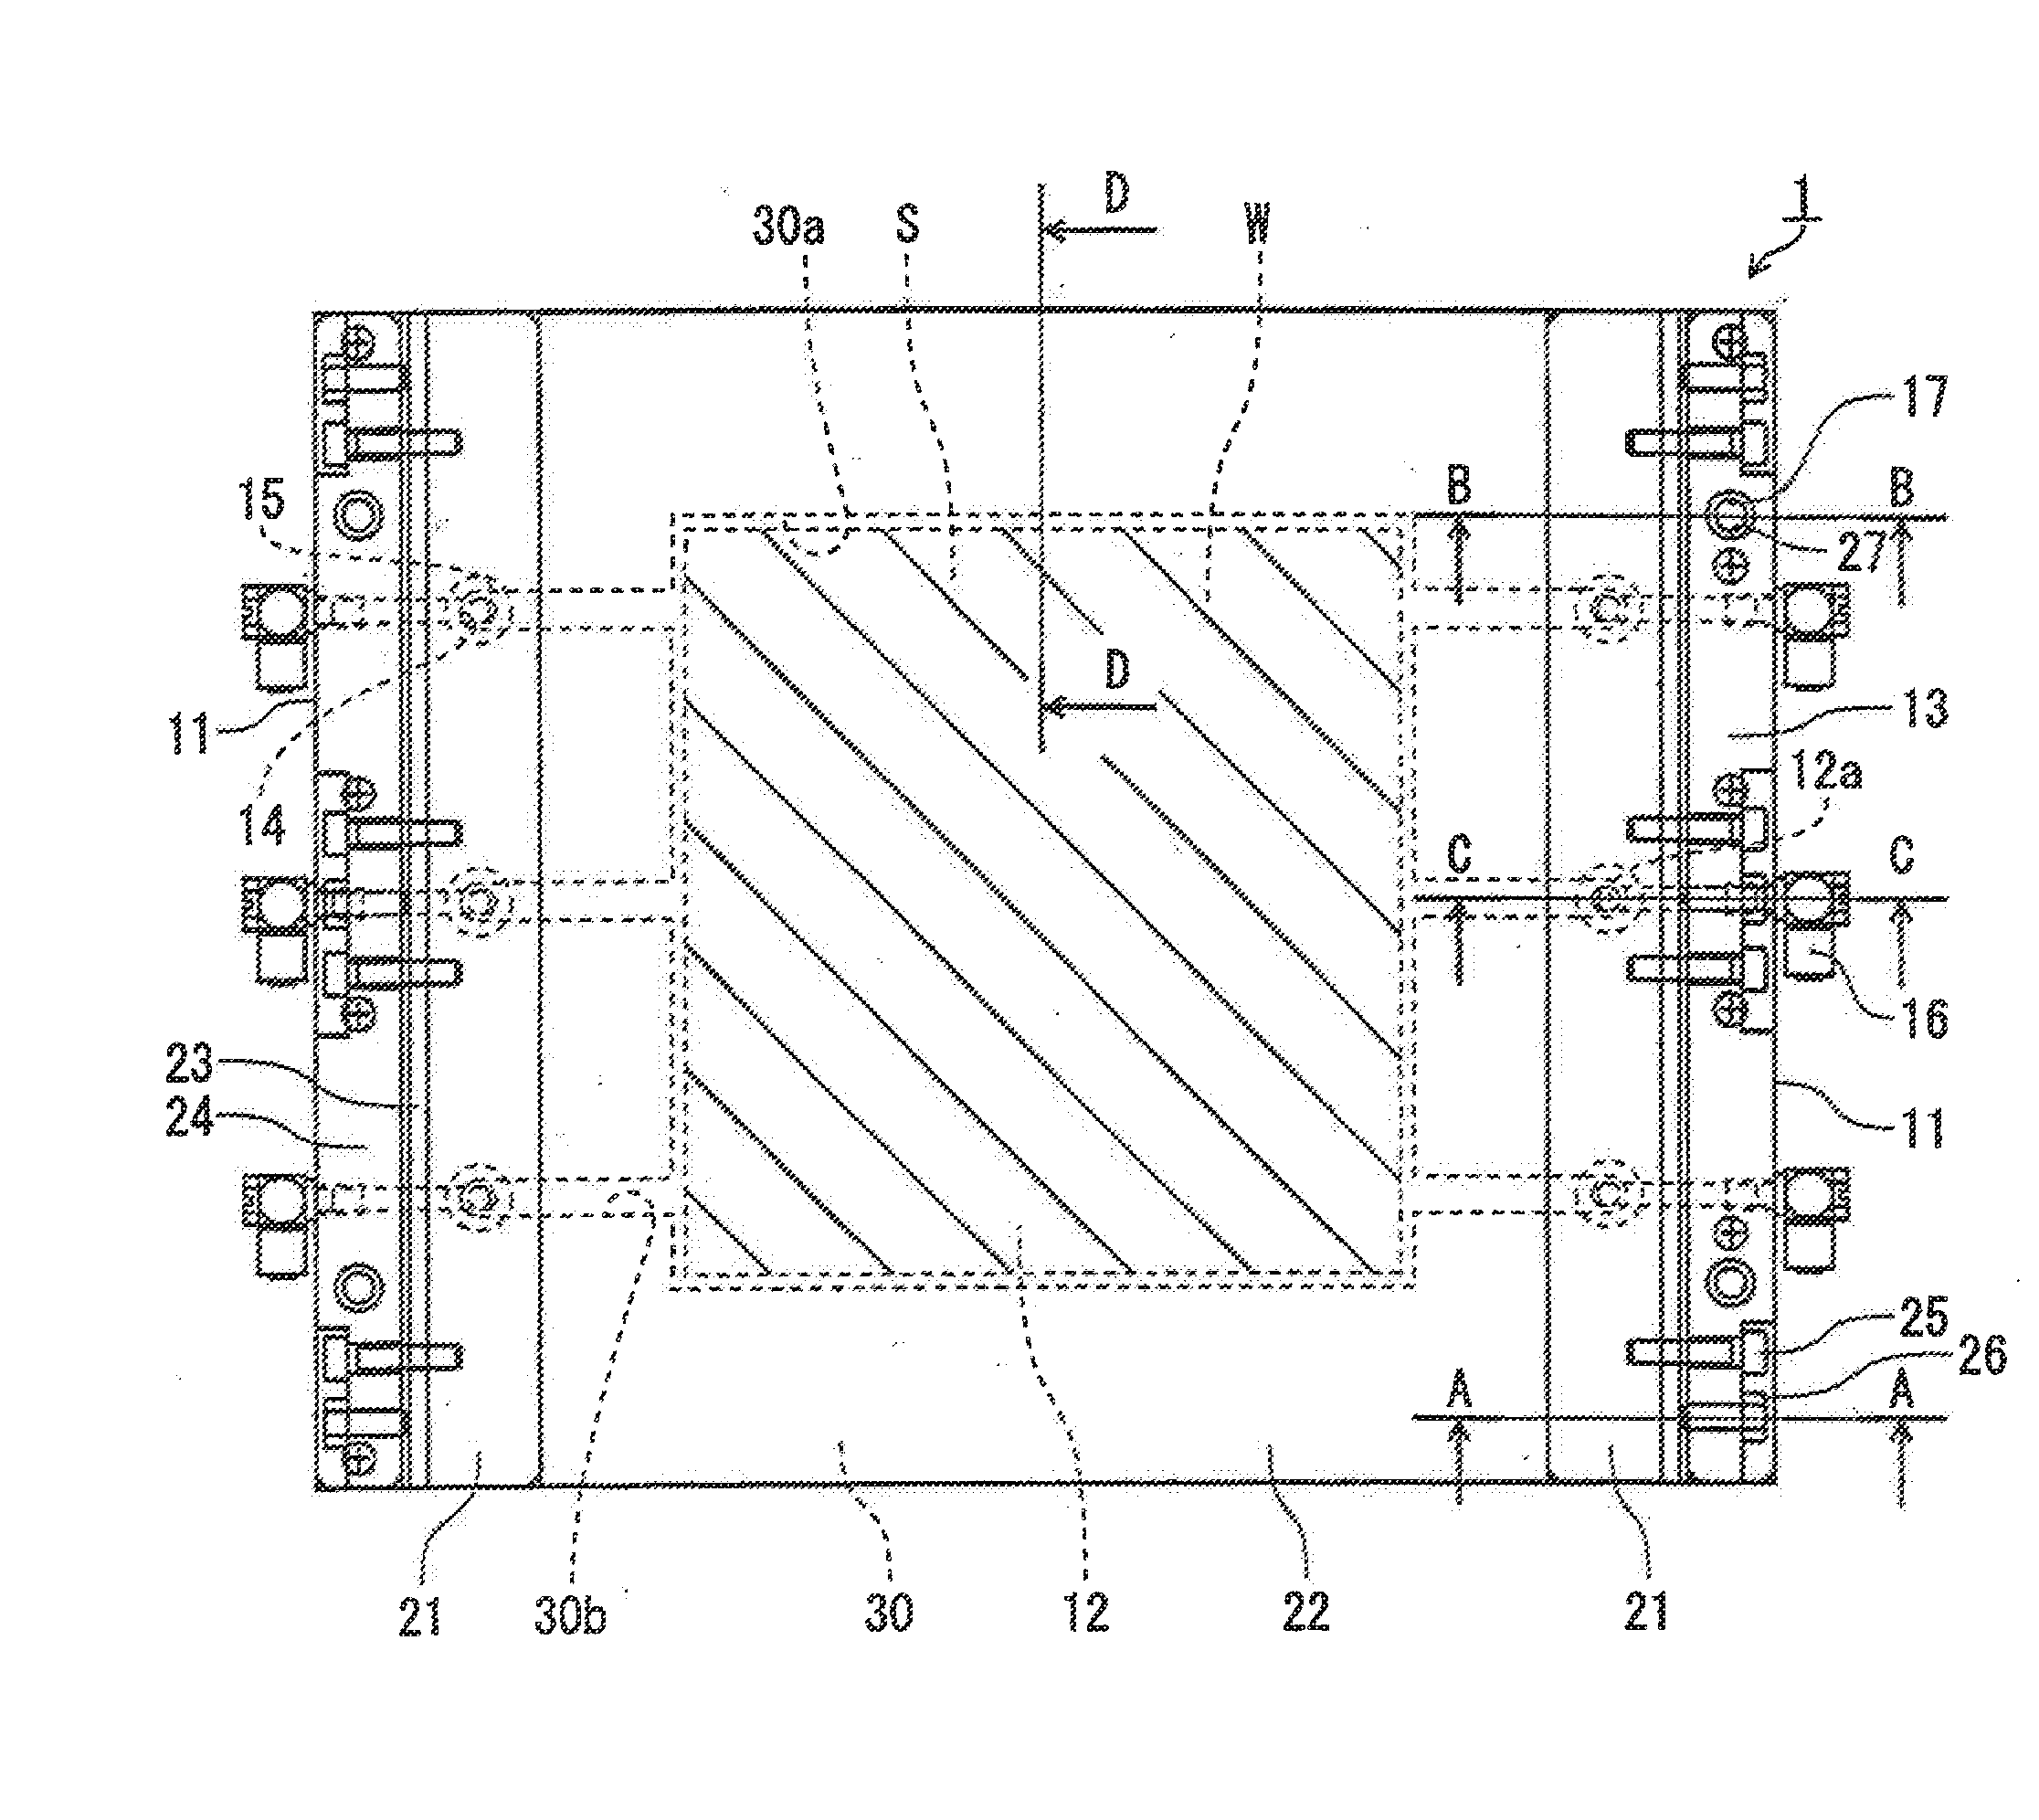 Jig for fixing laminated materials, a system for manufacturing bonded laminated materials, and a method for manufacturing bonded laminated materials